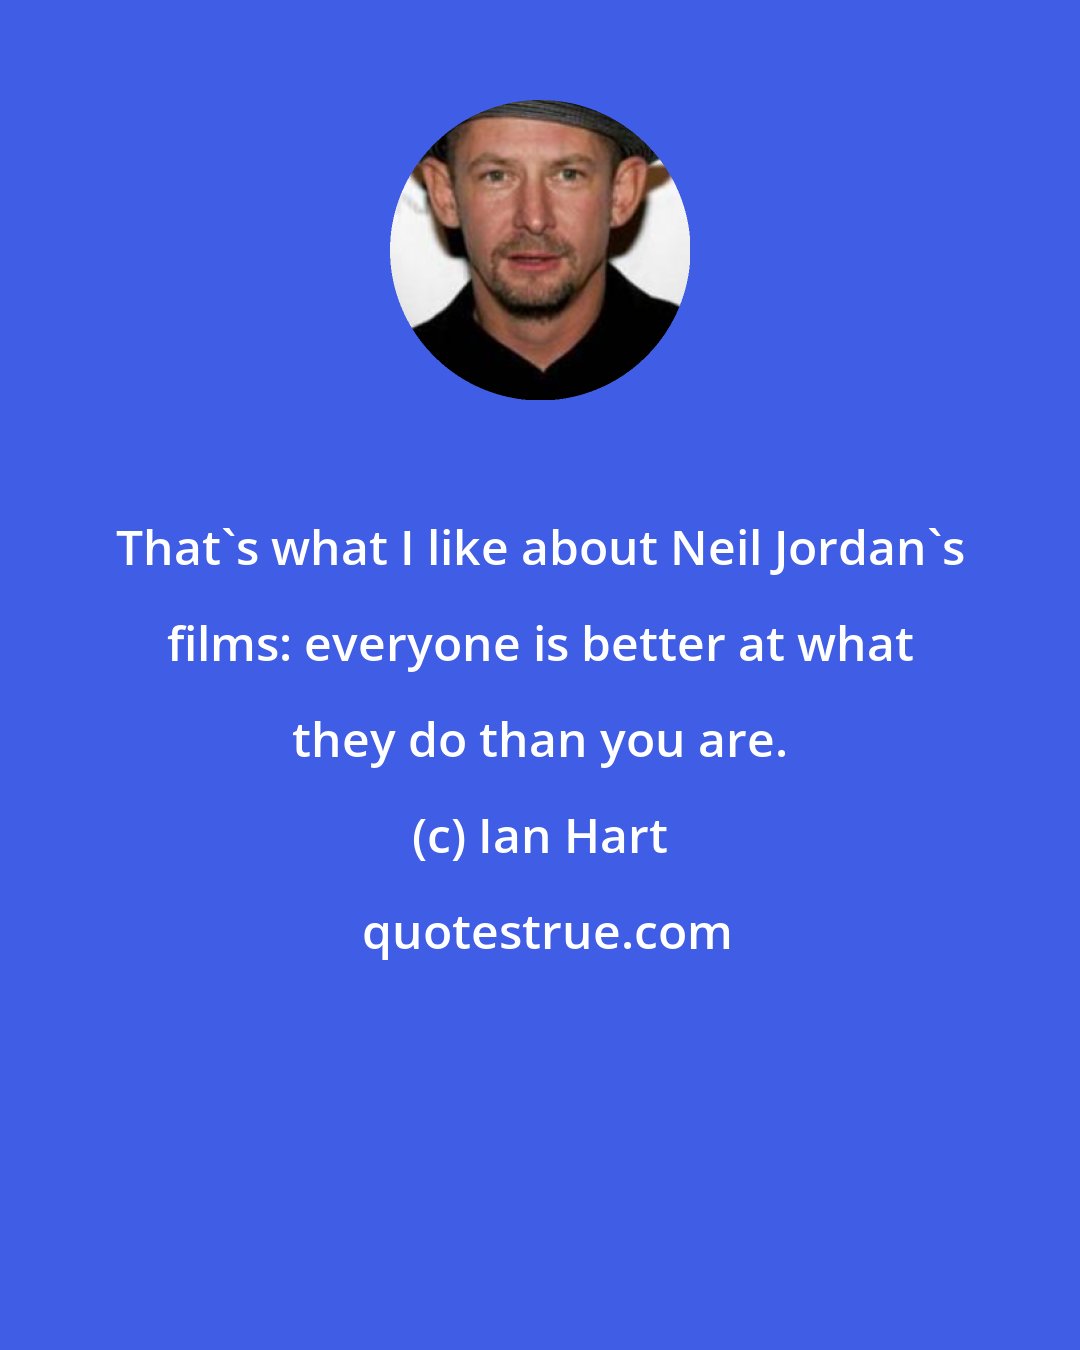 Ian Hart: That's what I like about Neil Jordan's films: everyone is better at what they do than you are.